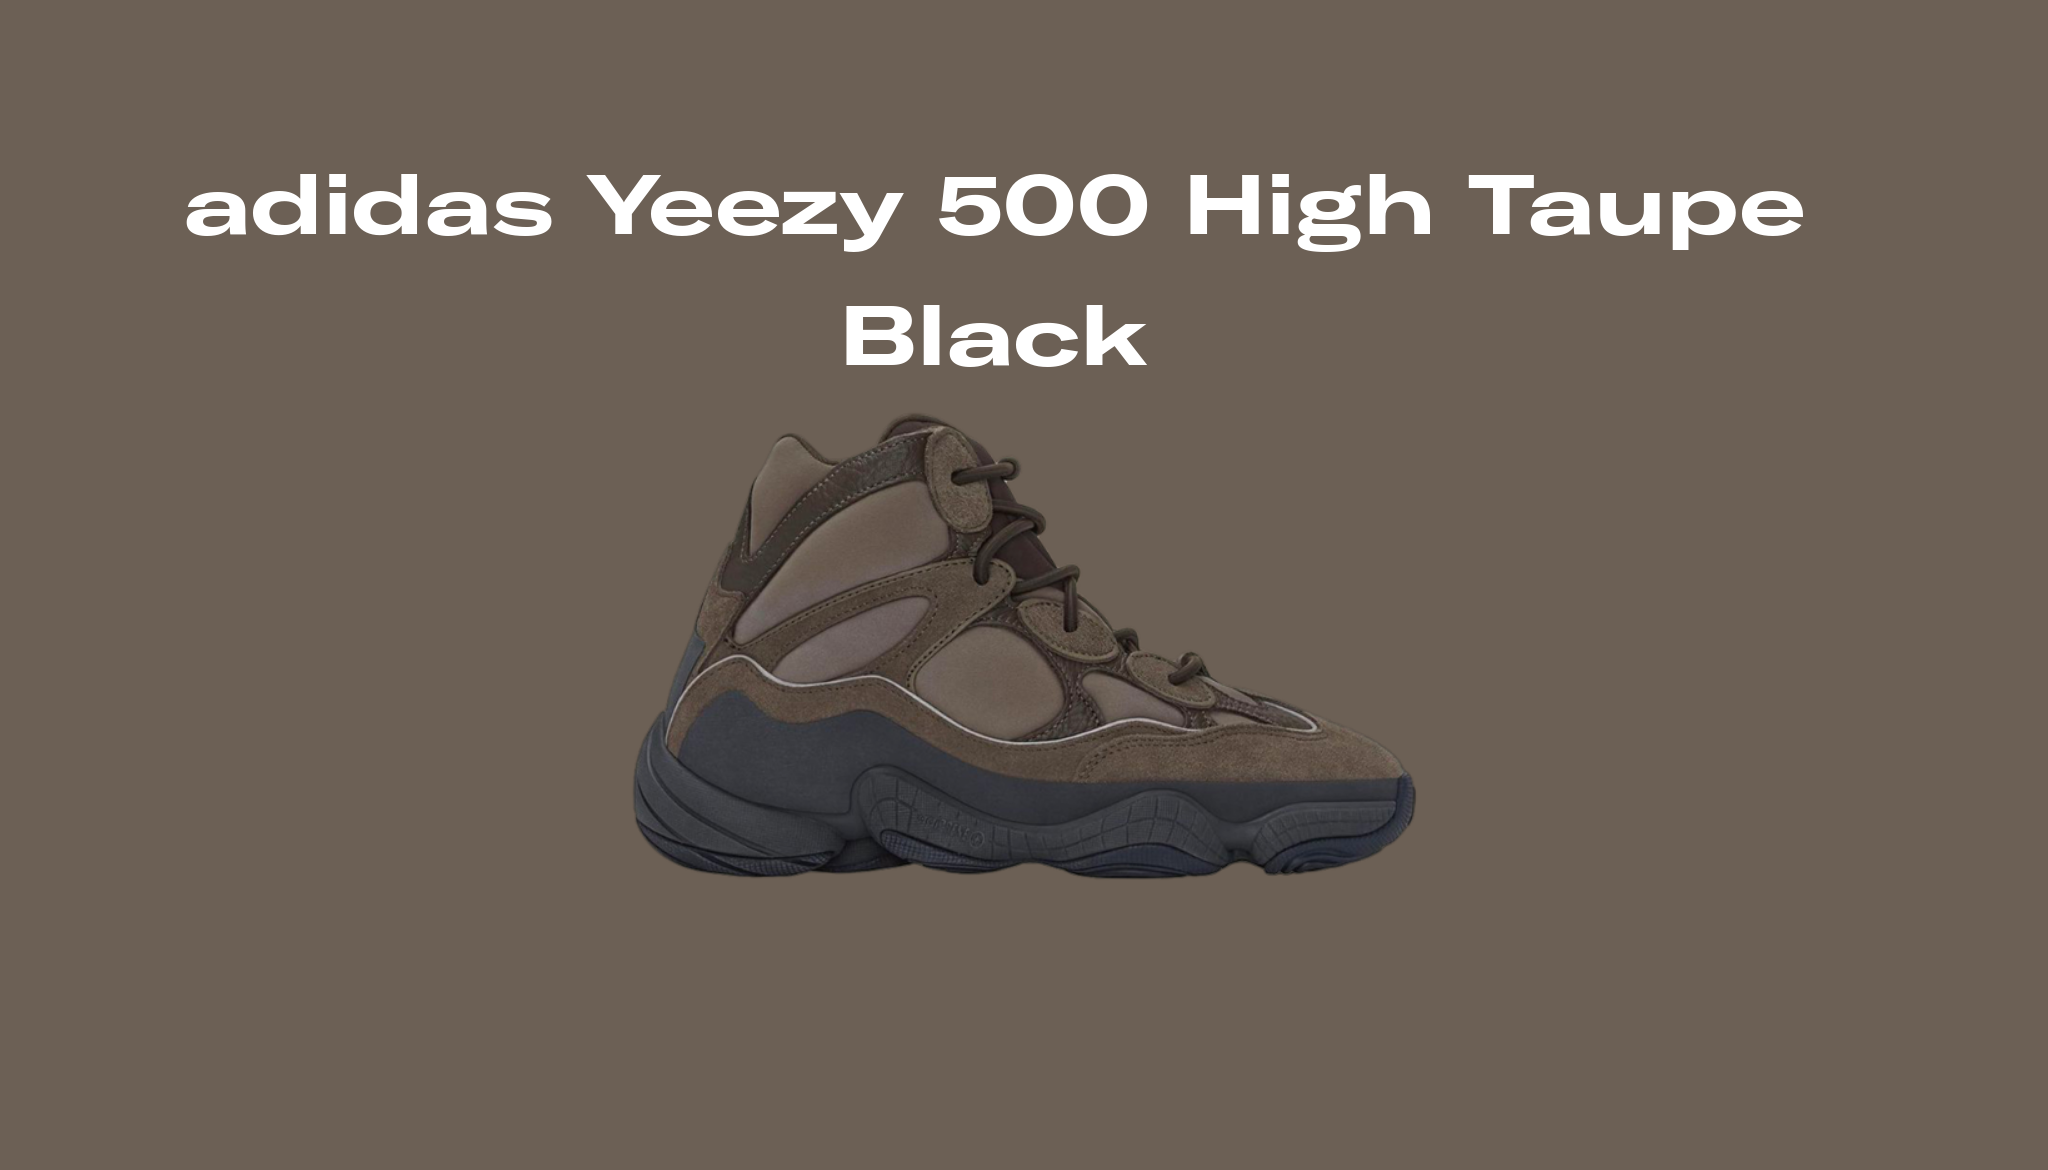 adidas Yeezy 500 High Taupe Black, Raffles and Release Date | Sole